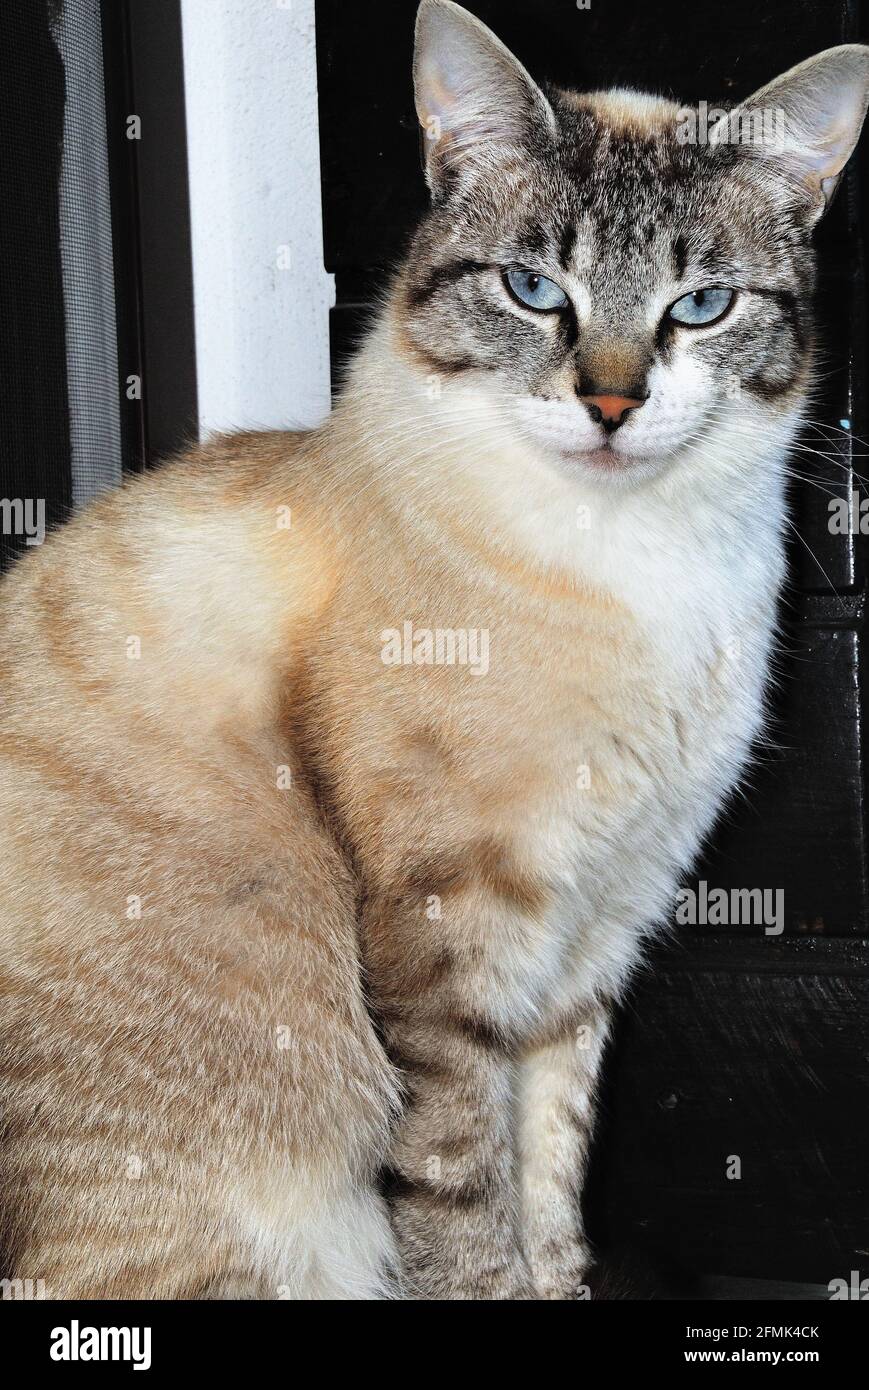 Gray cat with a prying look Stock Photo